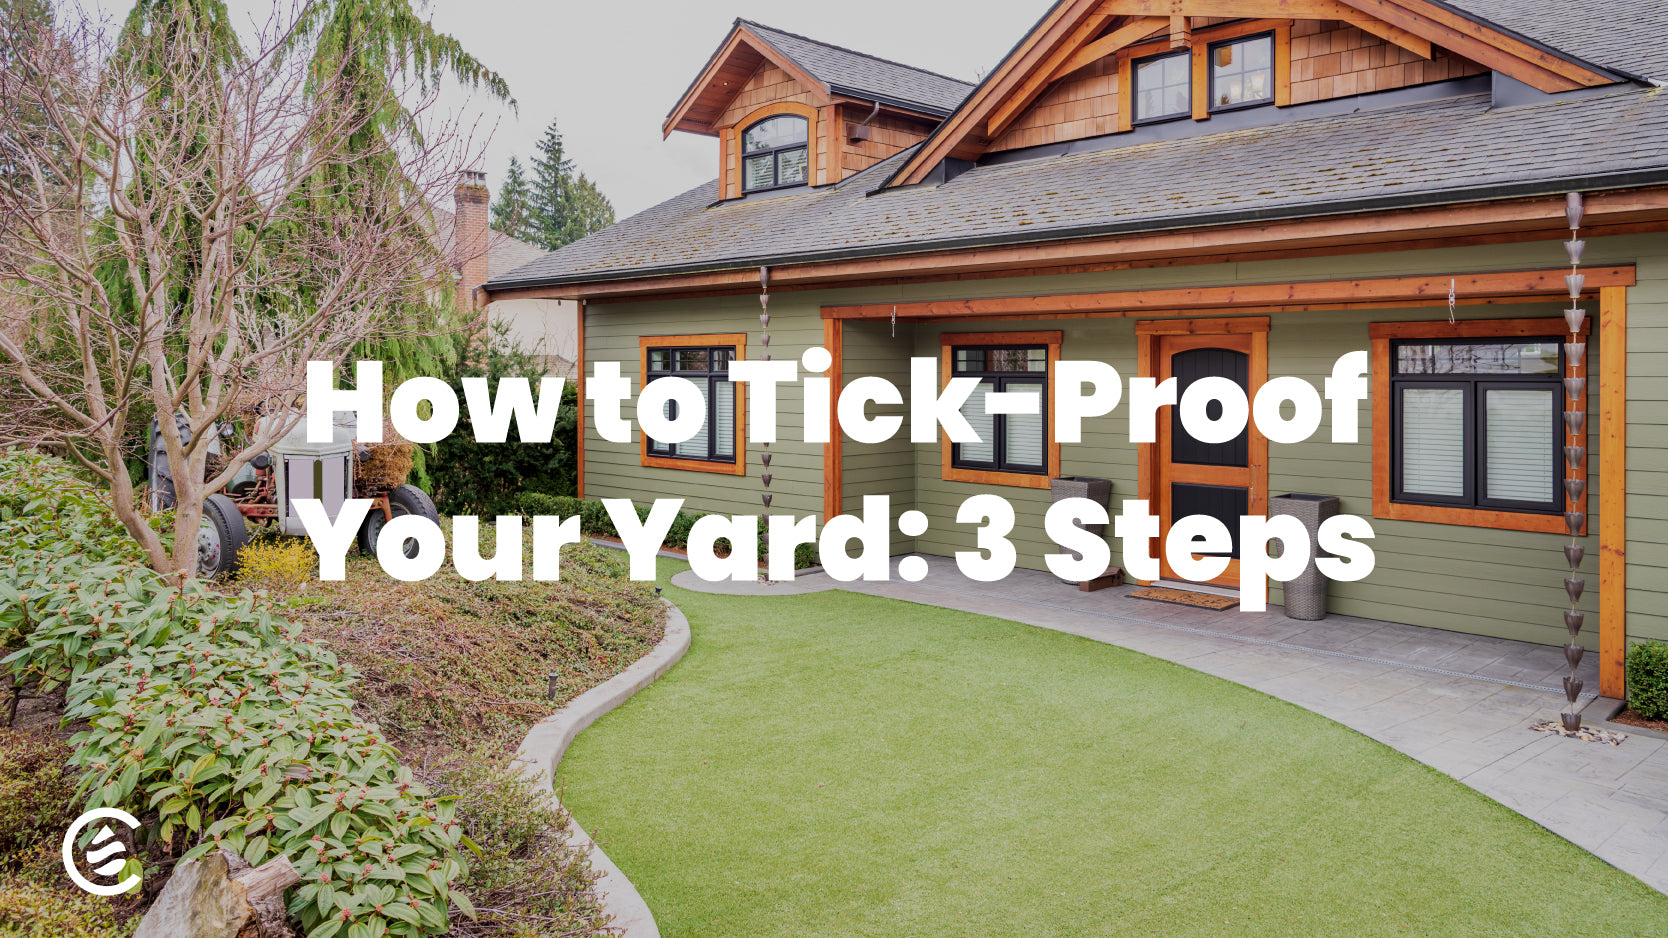 How to Tick-Proof Your Yard: 3 Steps